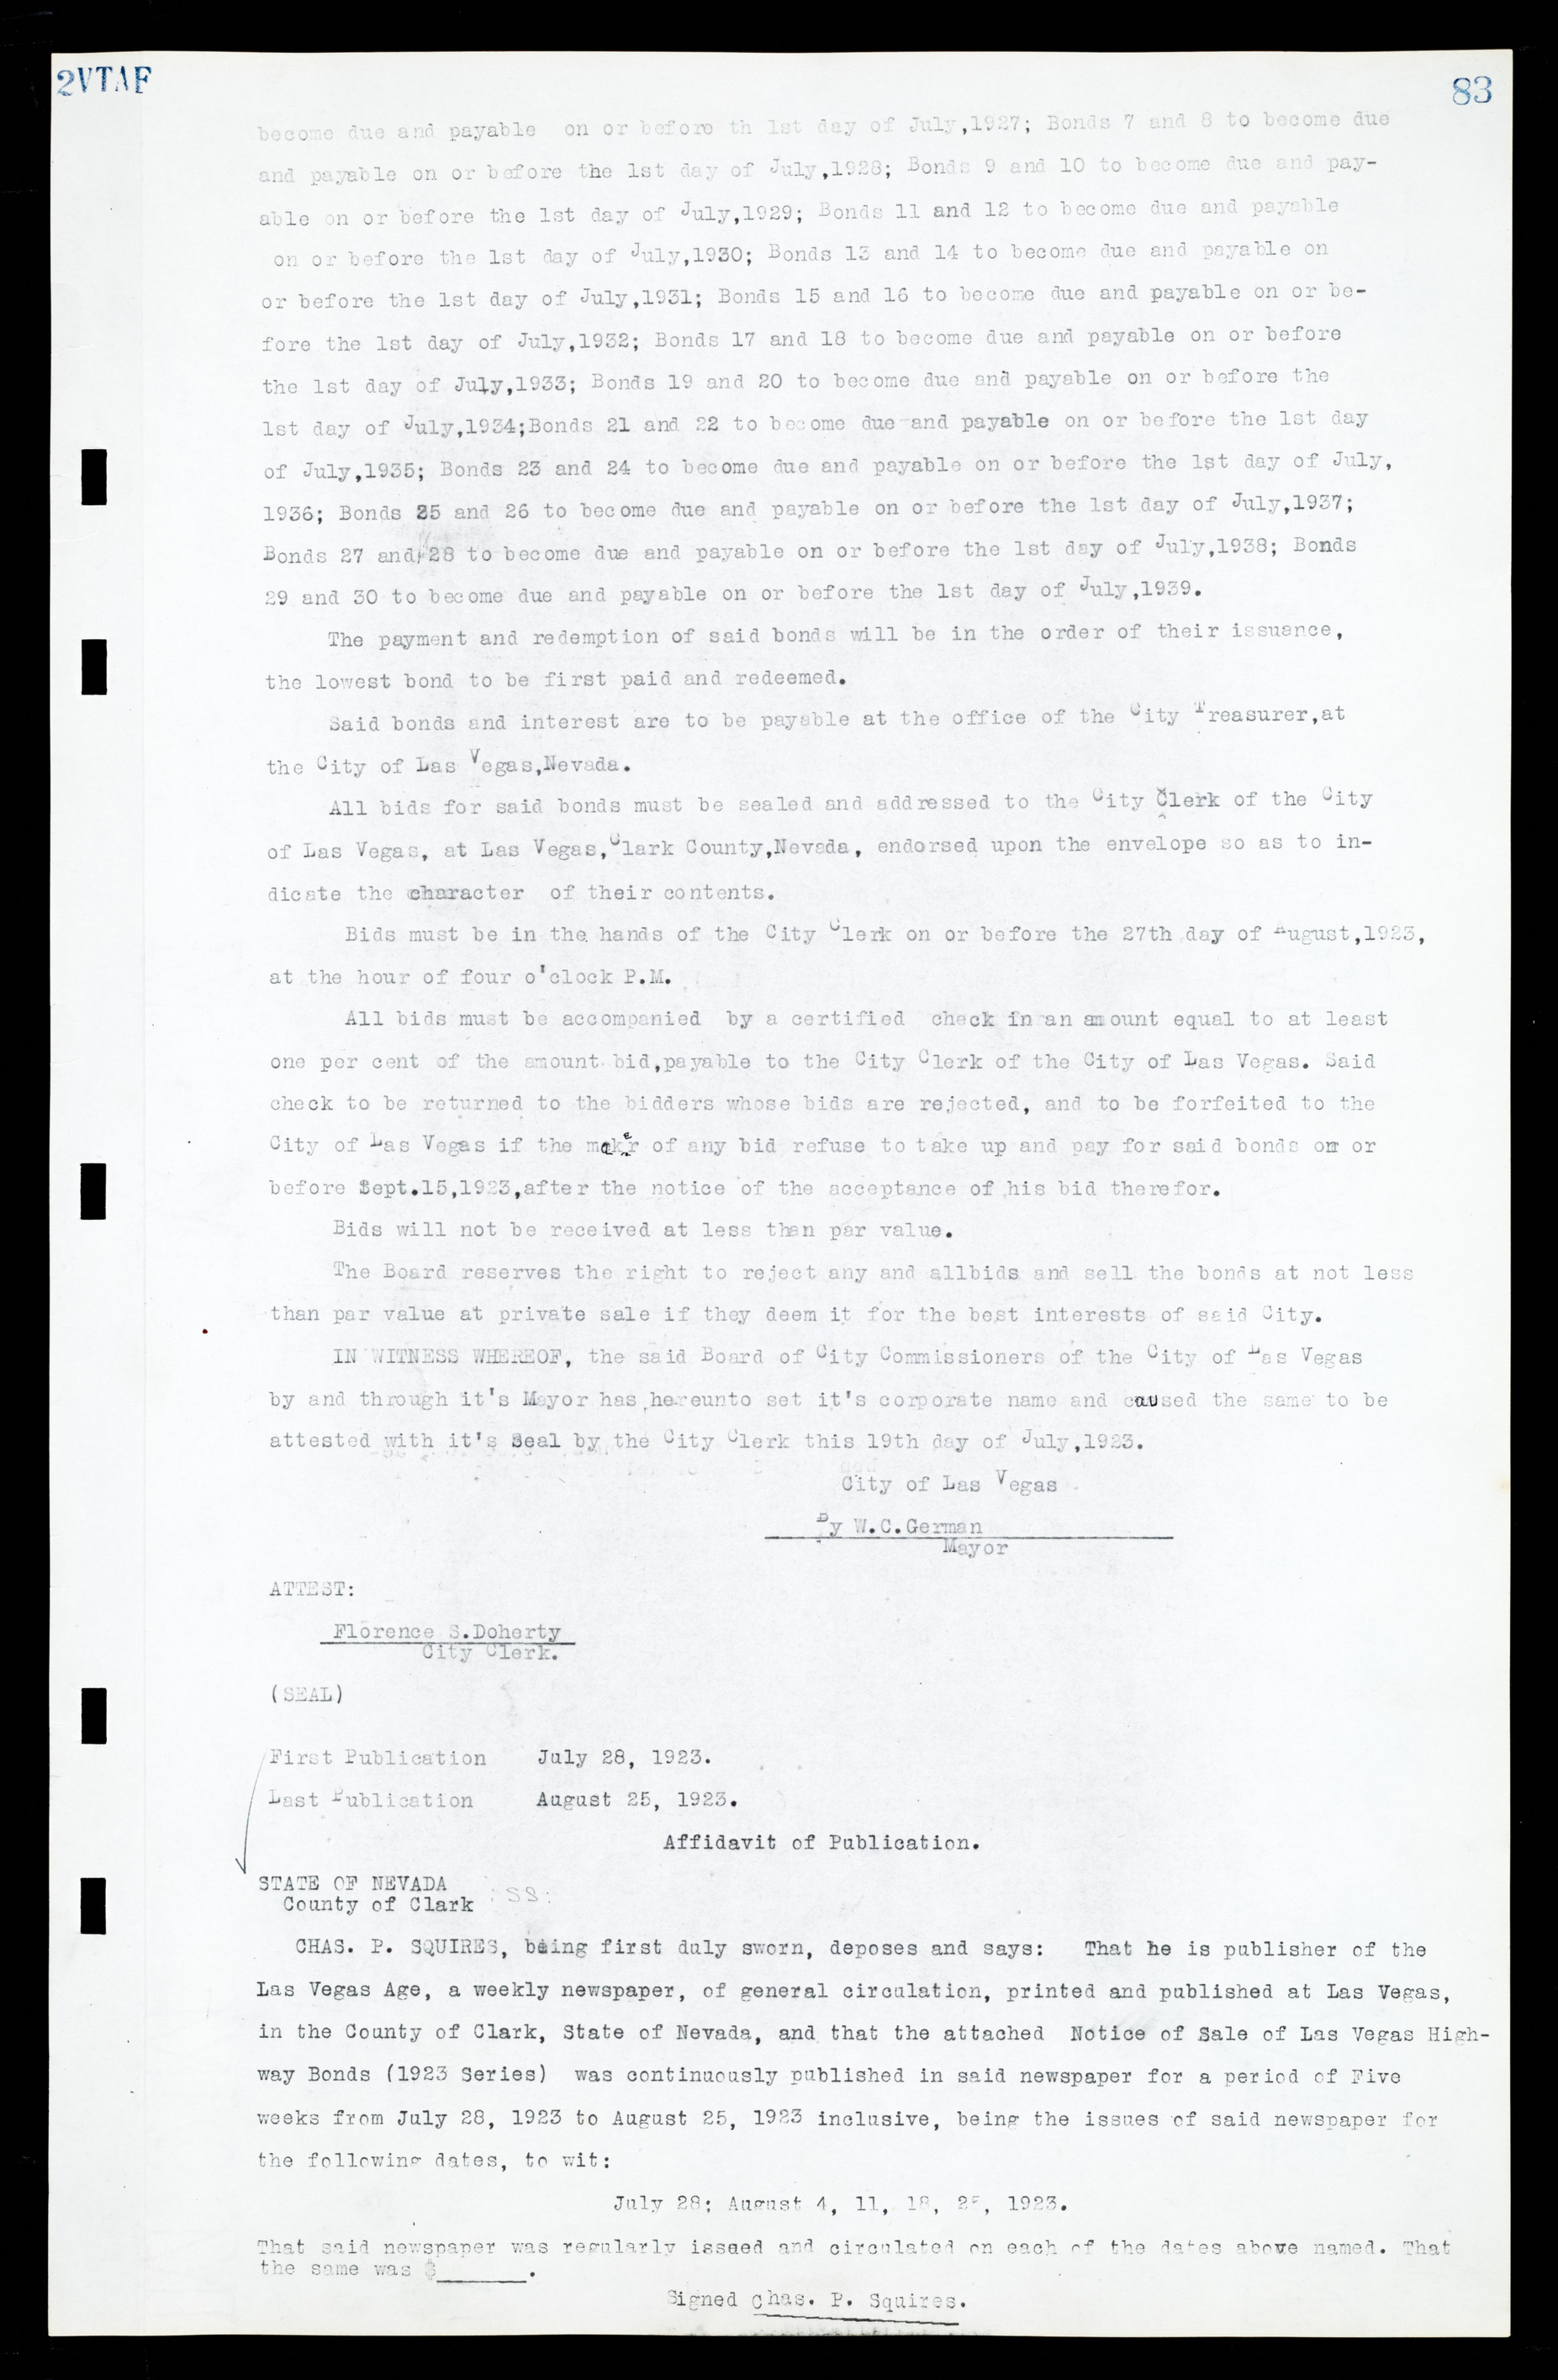 Las Vegas City Commission Minutes, March 1, 1922 to May 10, 1929, lvc000002-90